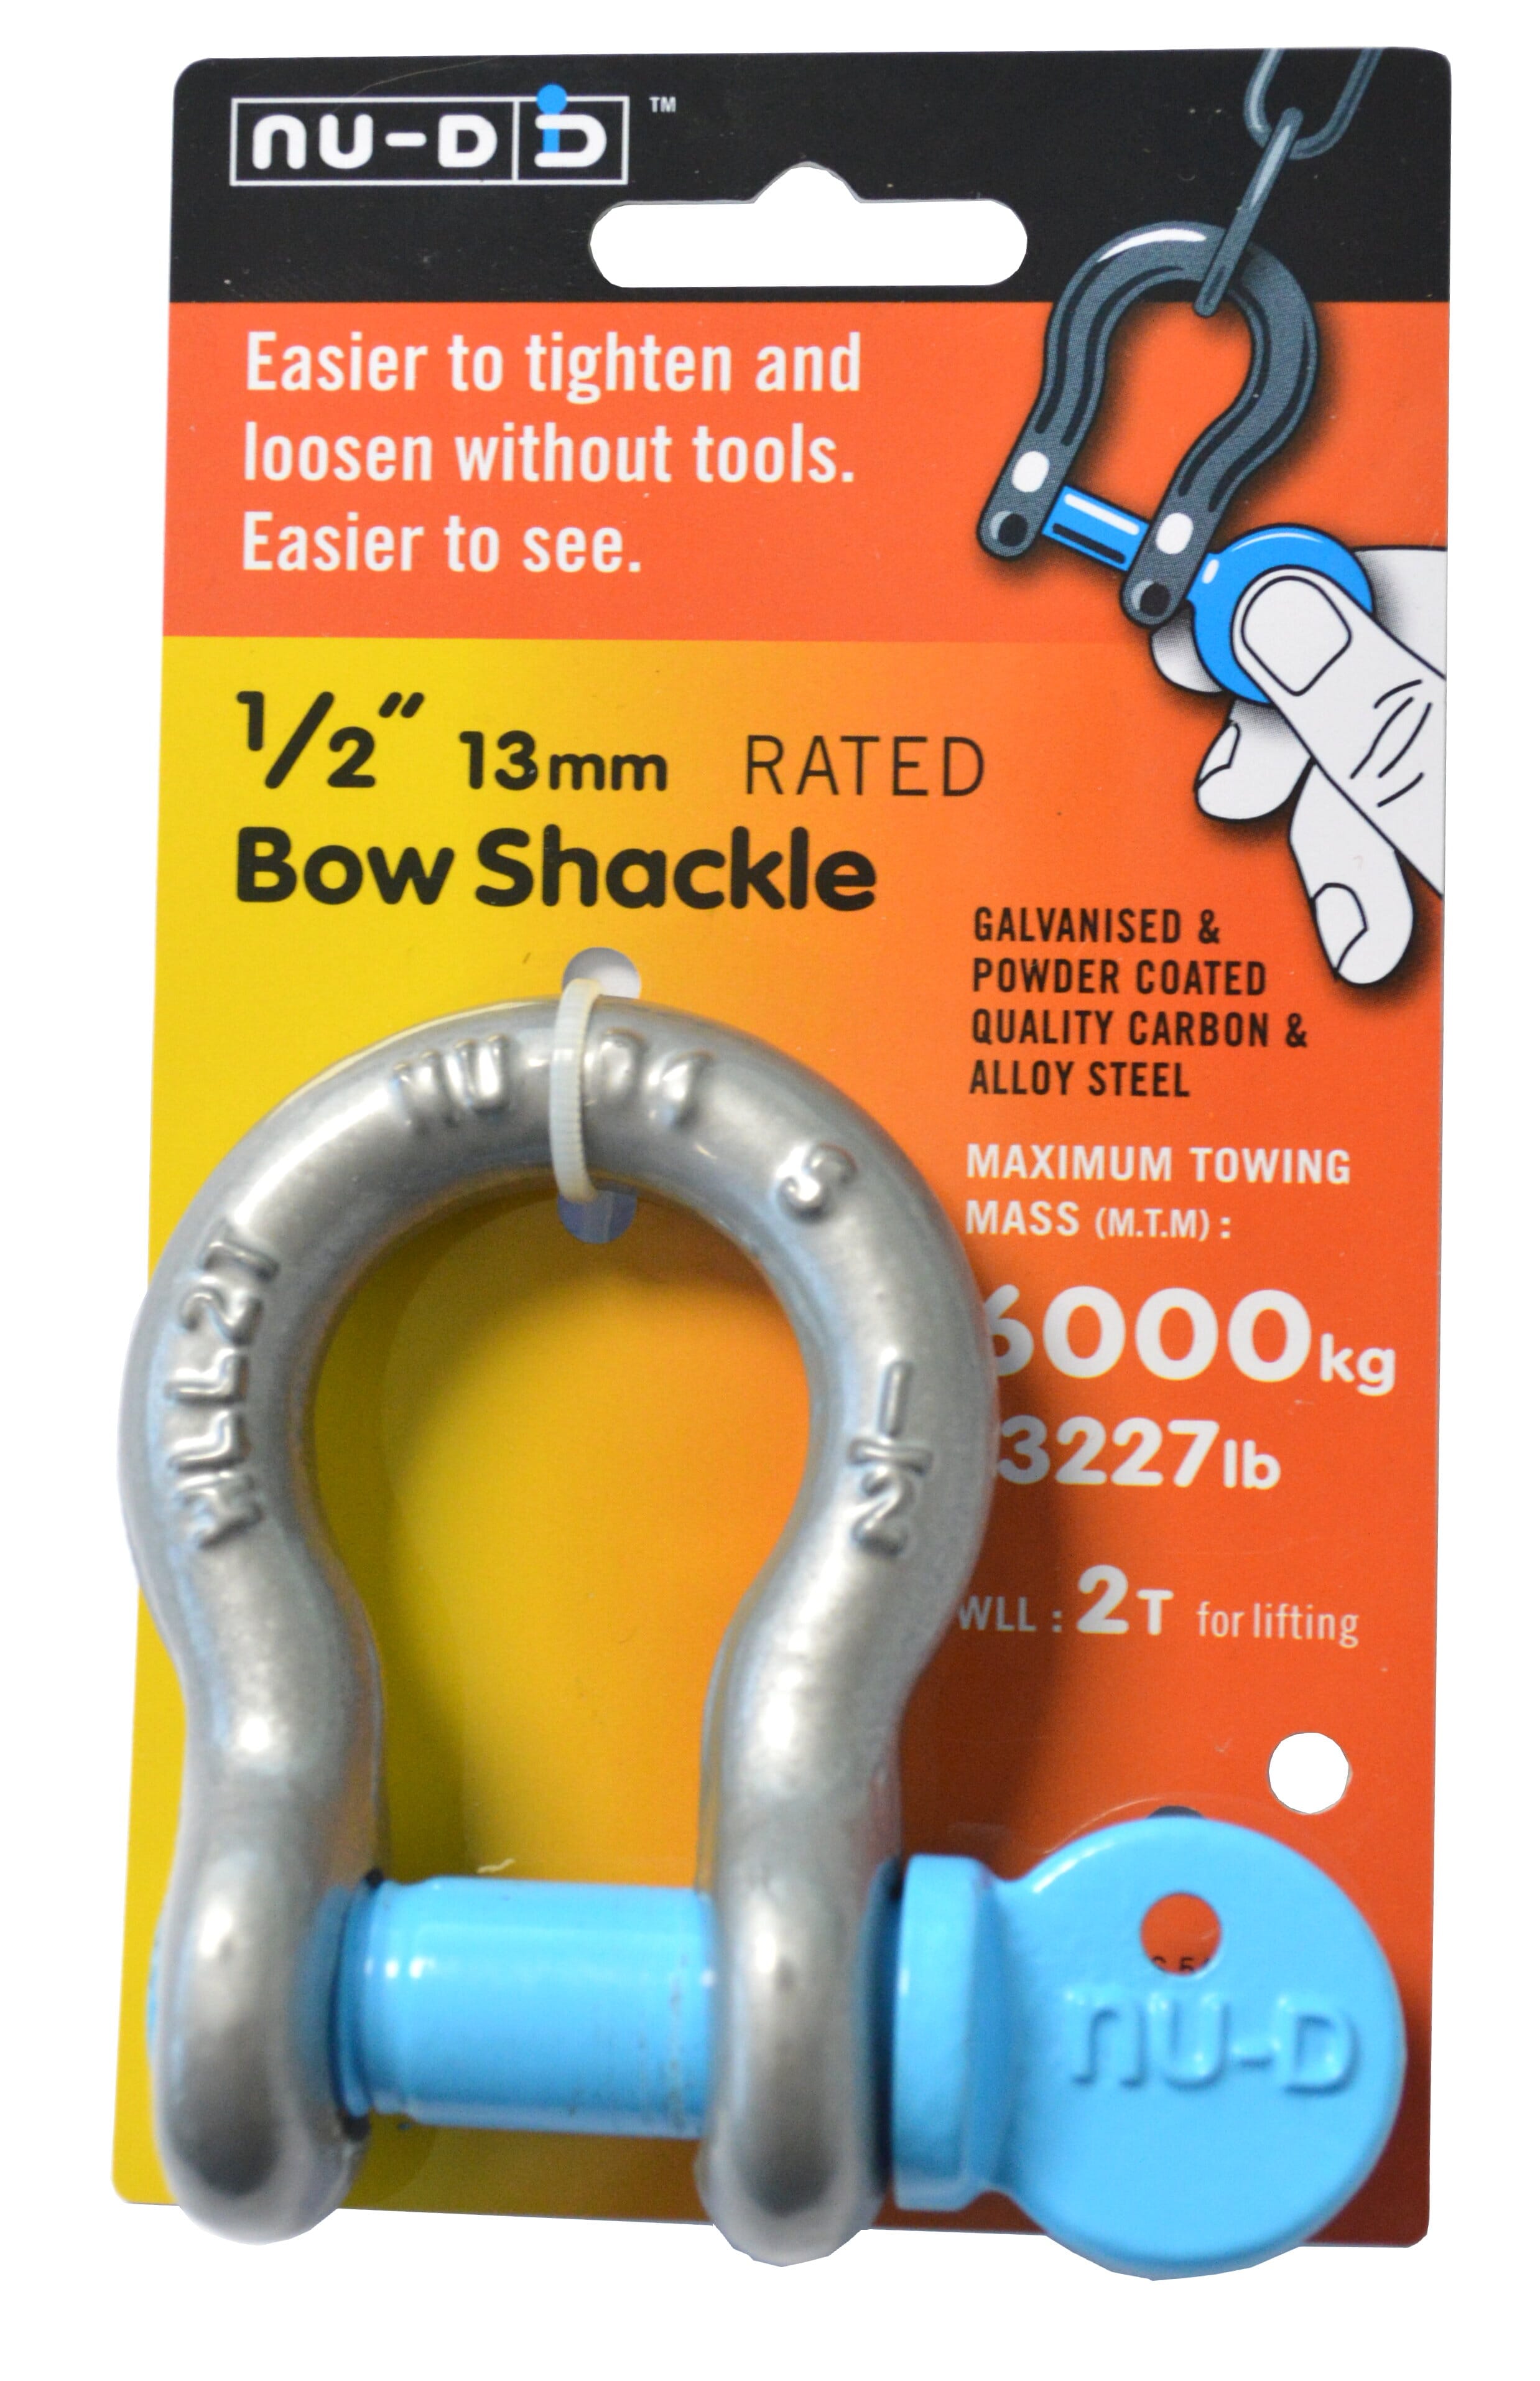 NU-D Bow Shackle Easy Tighten/Loosen Galvanised Tested WLL 2000Kg 13mm